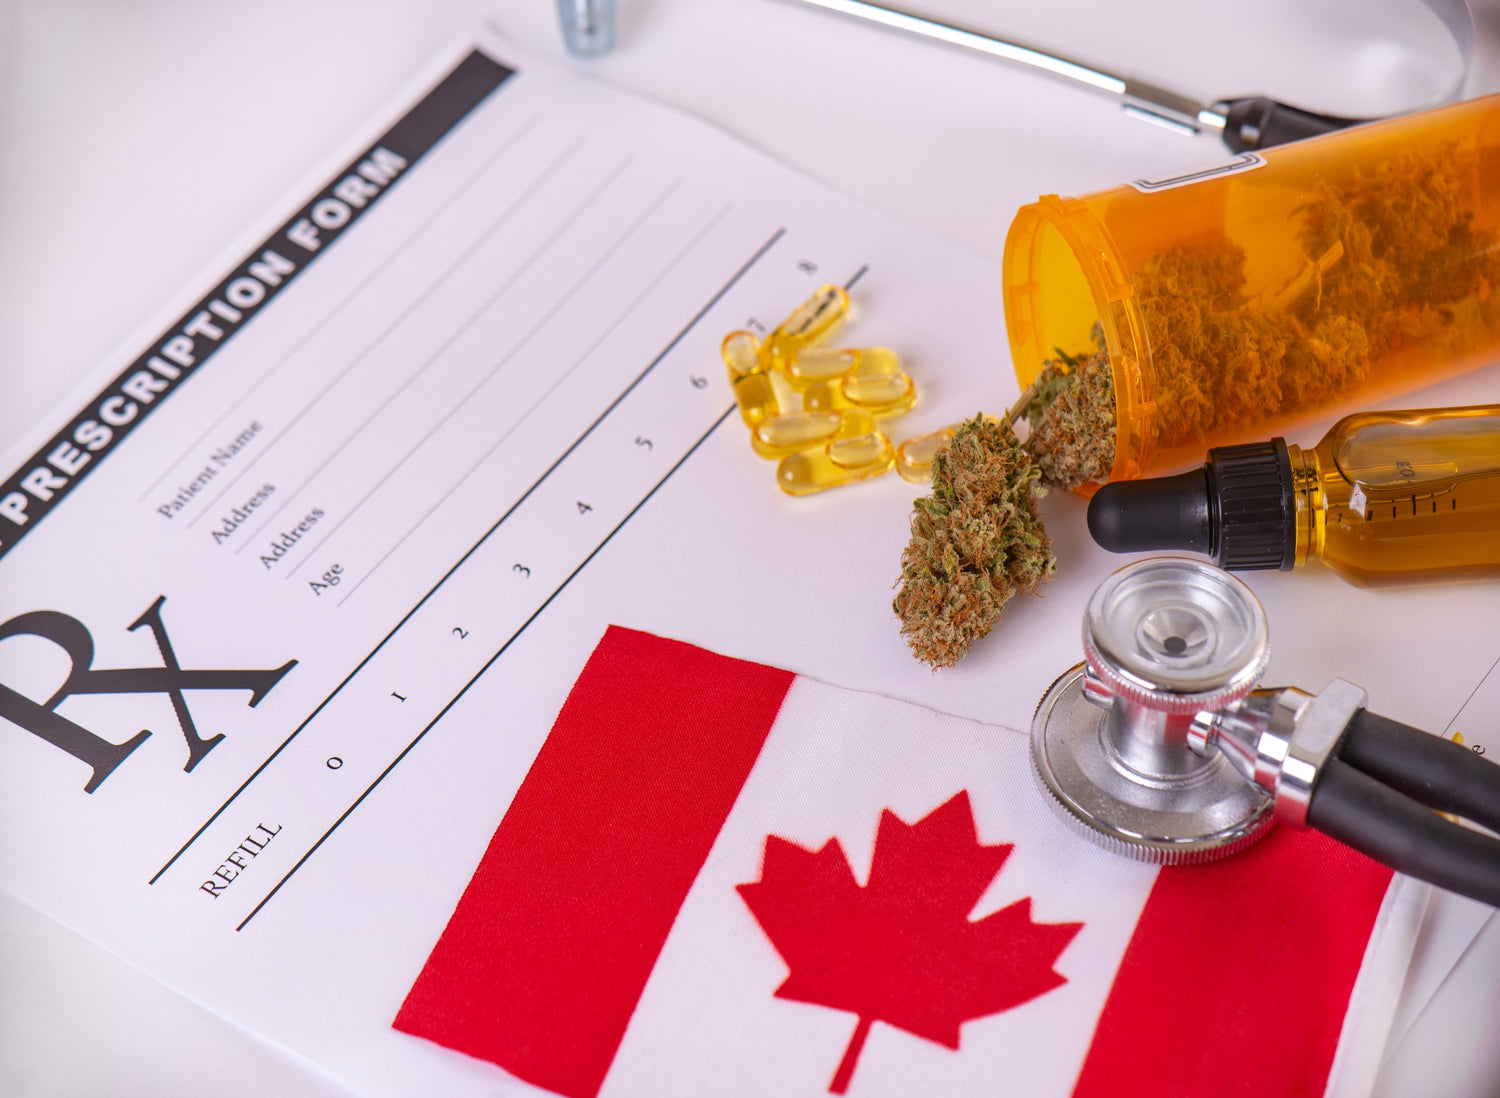 Medical Cannabis Registrations In Canada Hit Lowest Levels Since Legalization